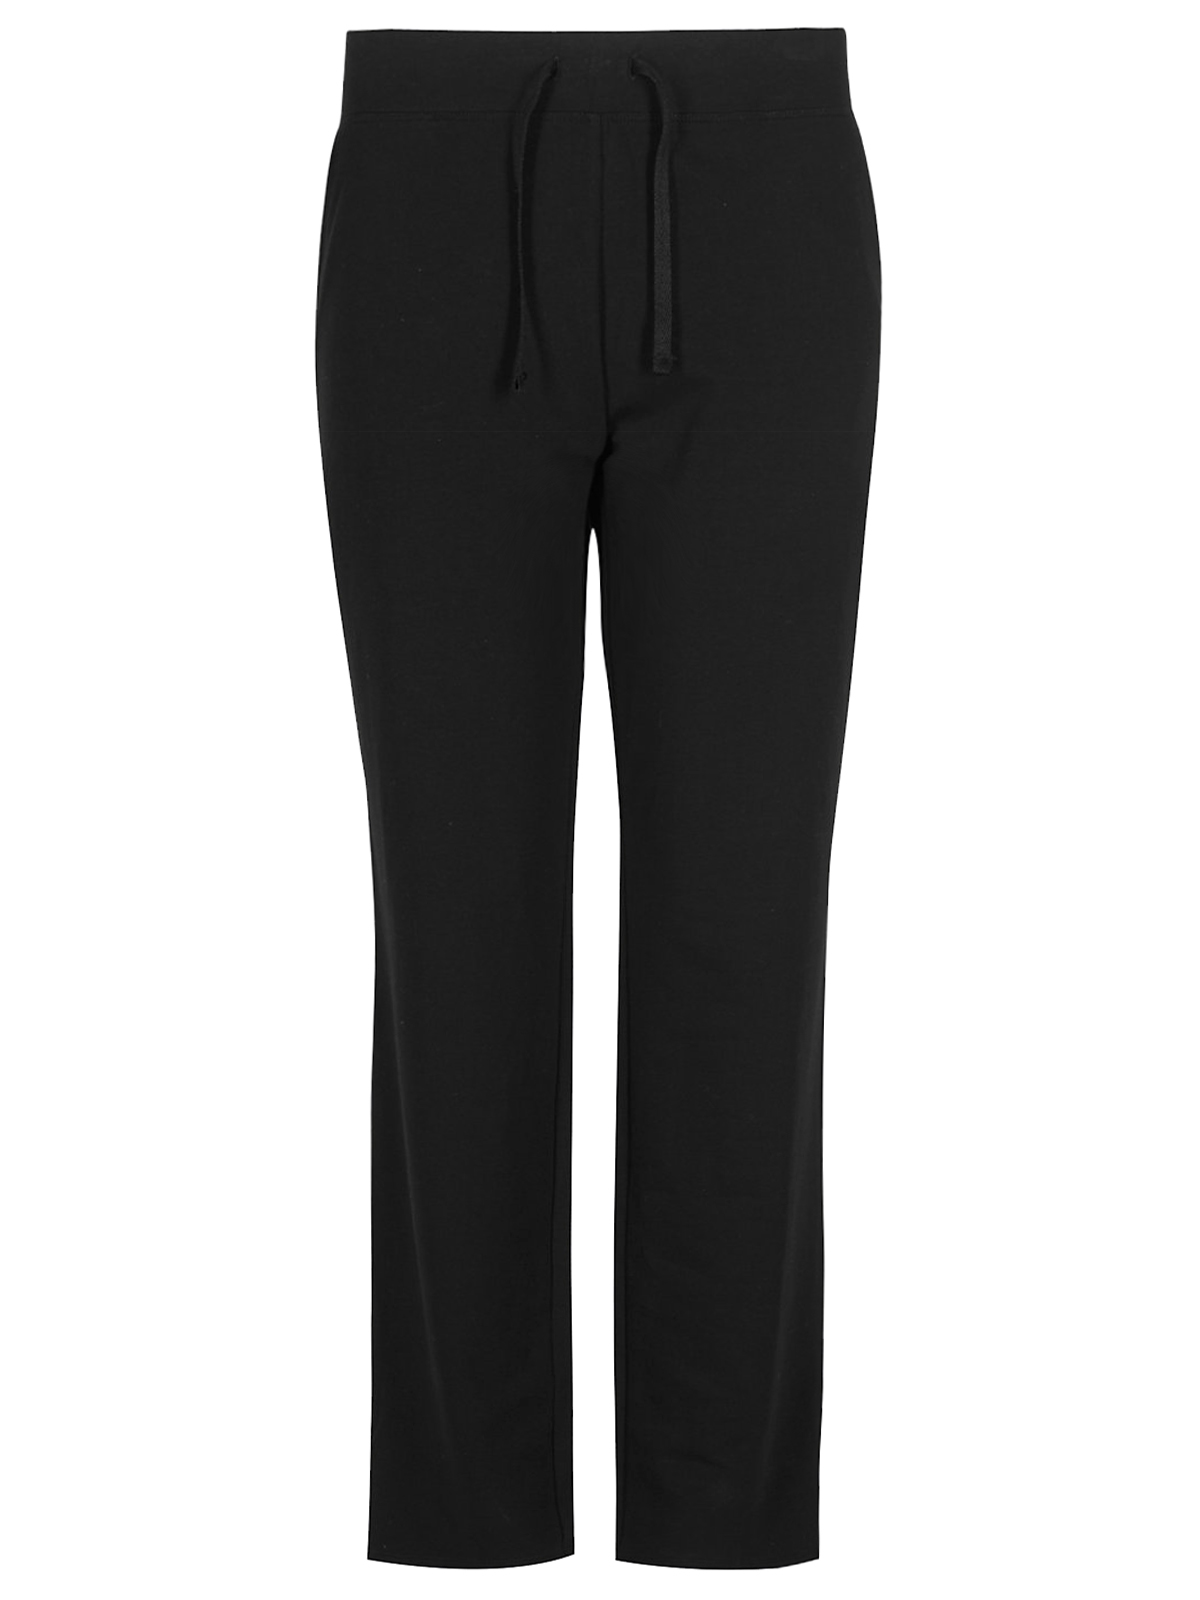 Marks and Spencer - - M&5 BLACK Adjustable Waist Cotton Rich Straight ...